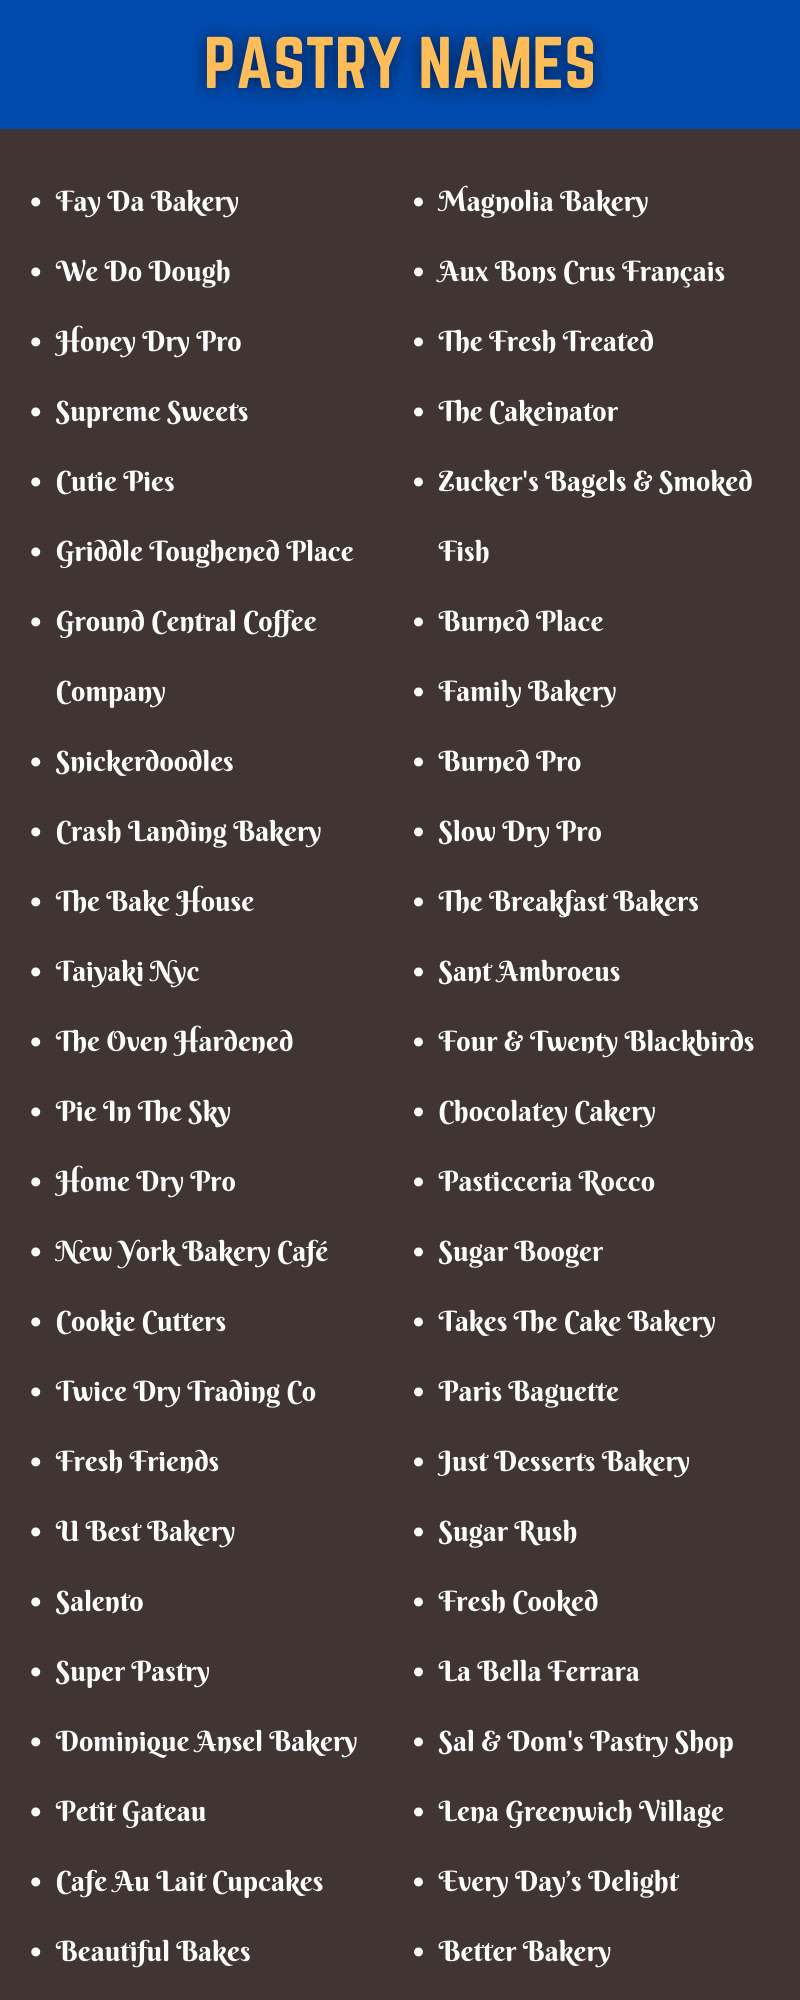 Pastry Names